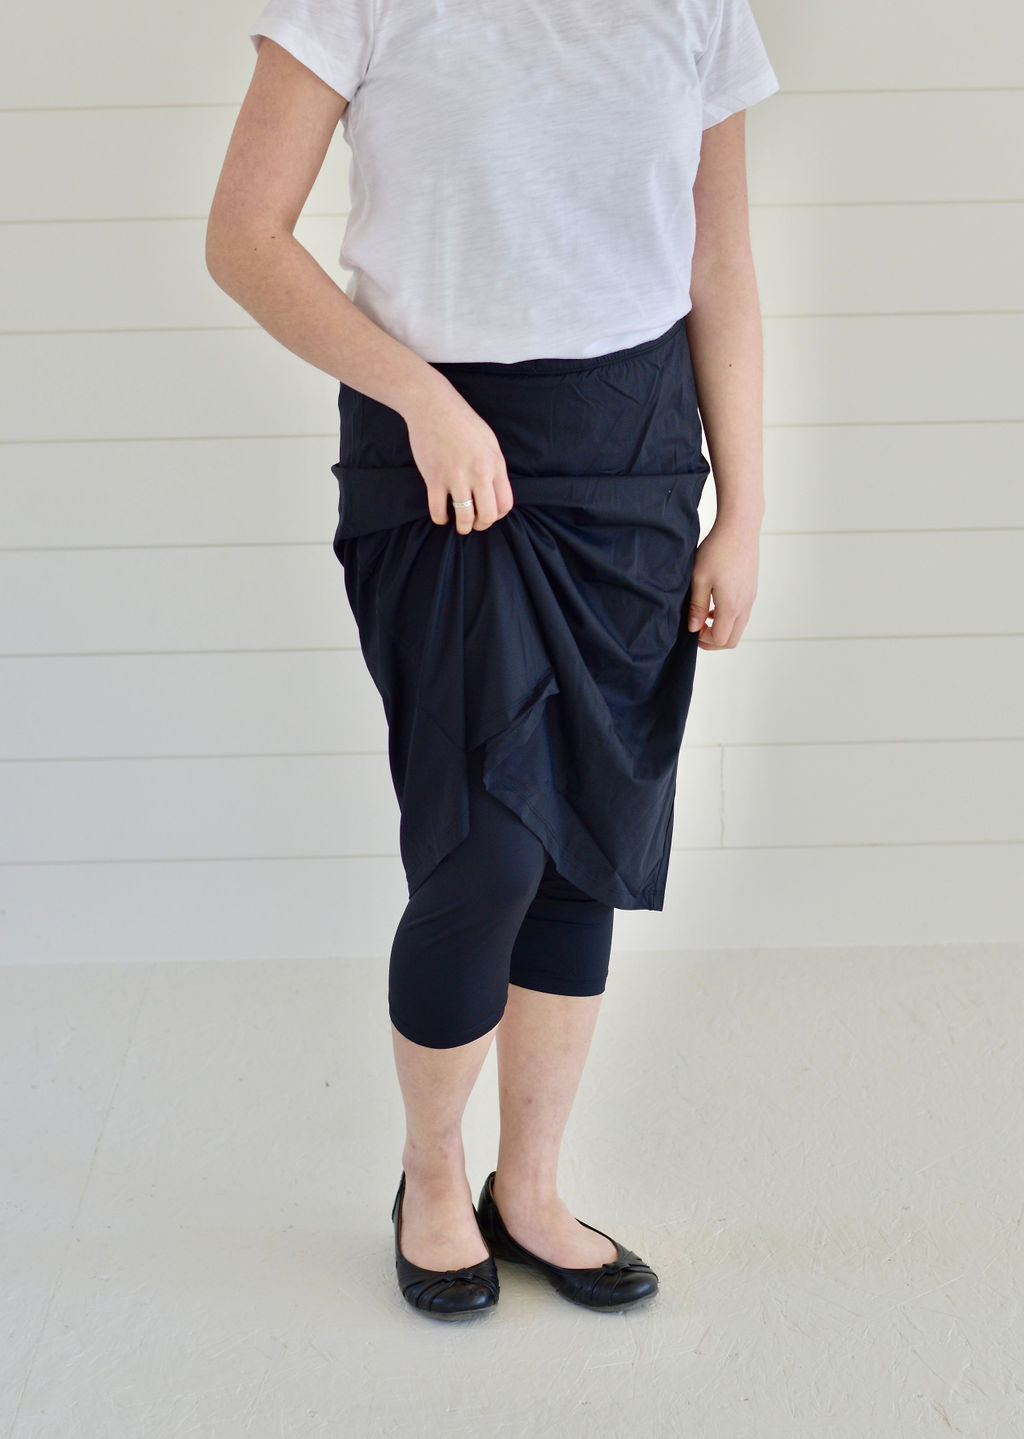 Athletic/Swim Skirts – For His Glory Boutique